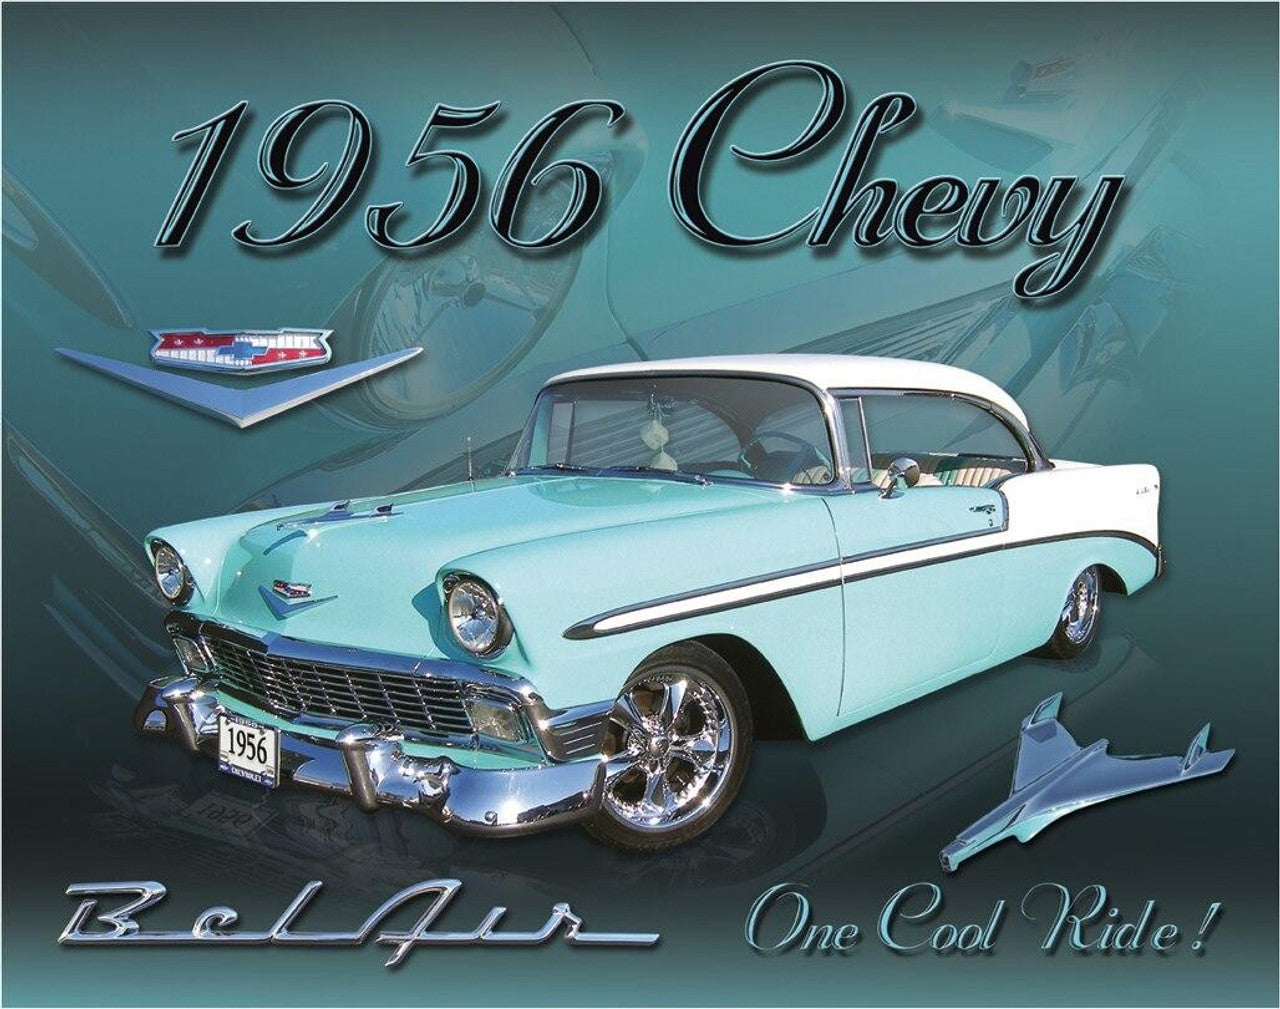 Vintage 1956 Chevy Bel Air Tin Sign, 16x12.5 inches. Made in USA, indoor/outdoor, durable, and stylish addition to any collection.